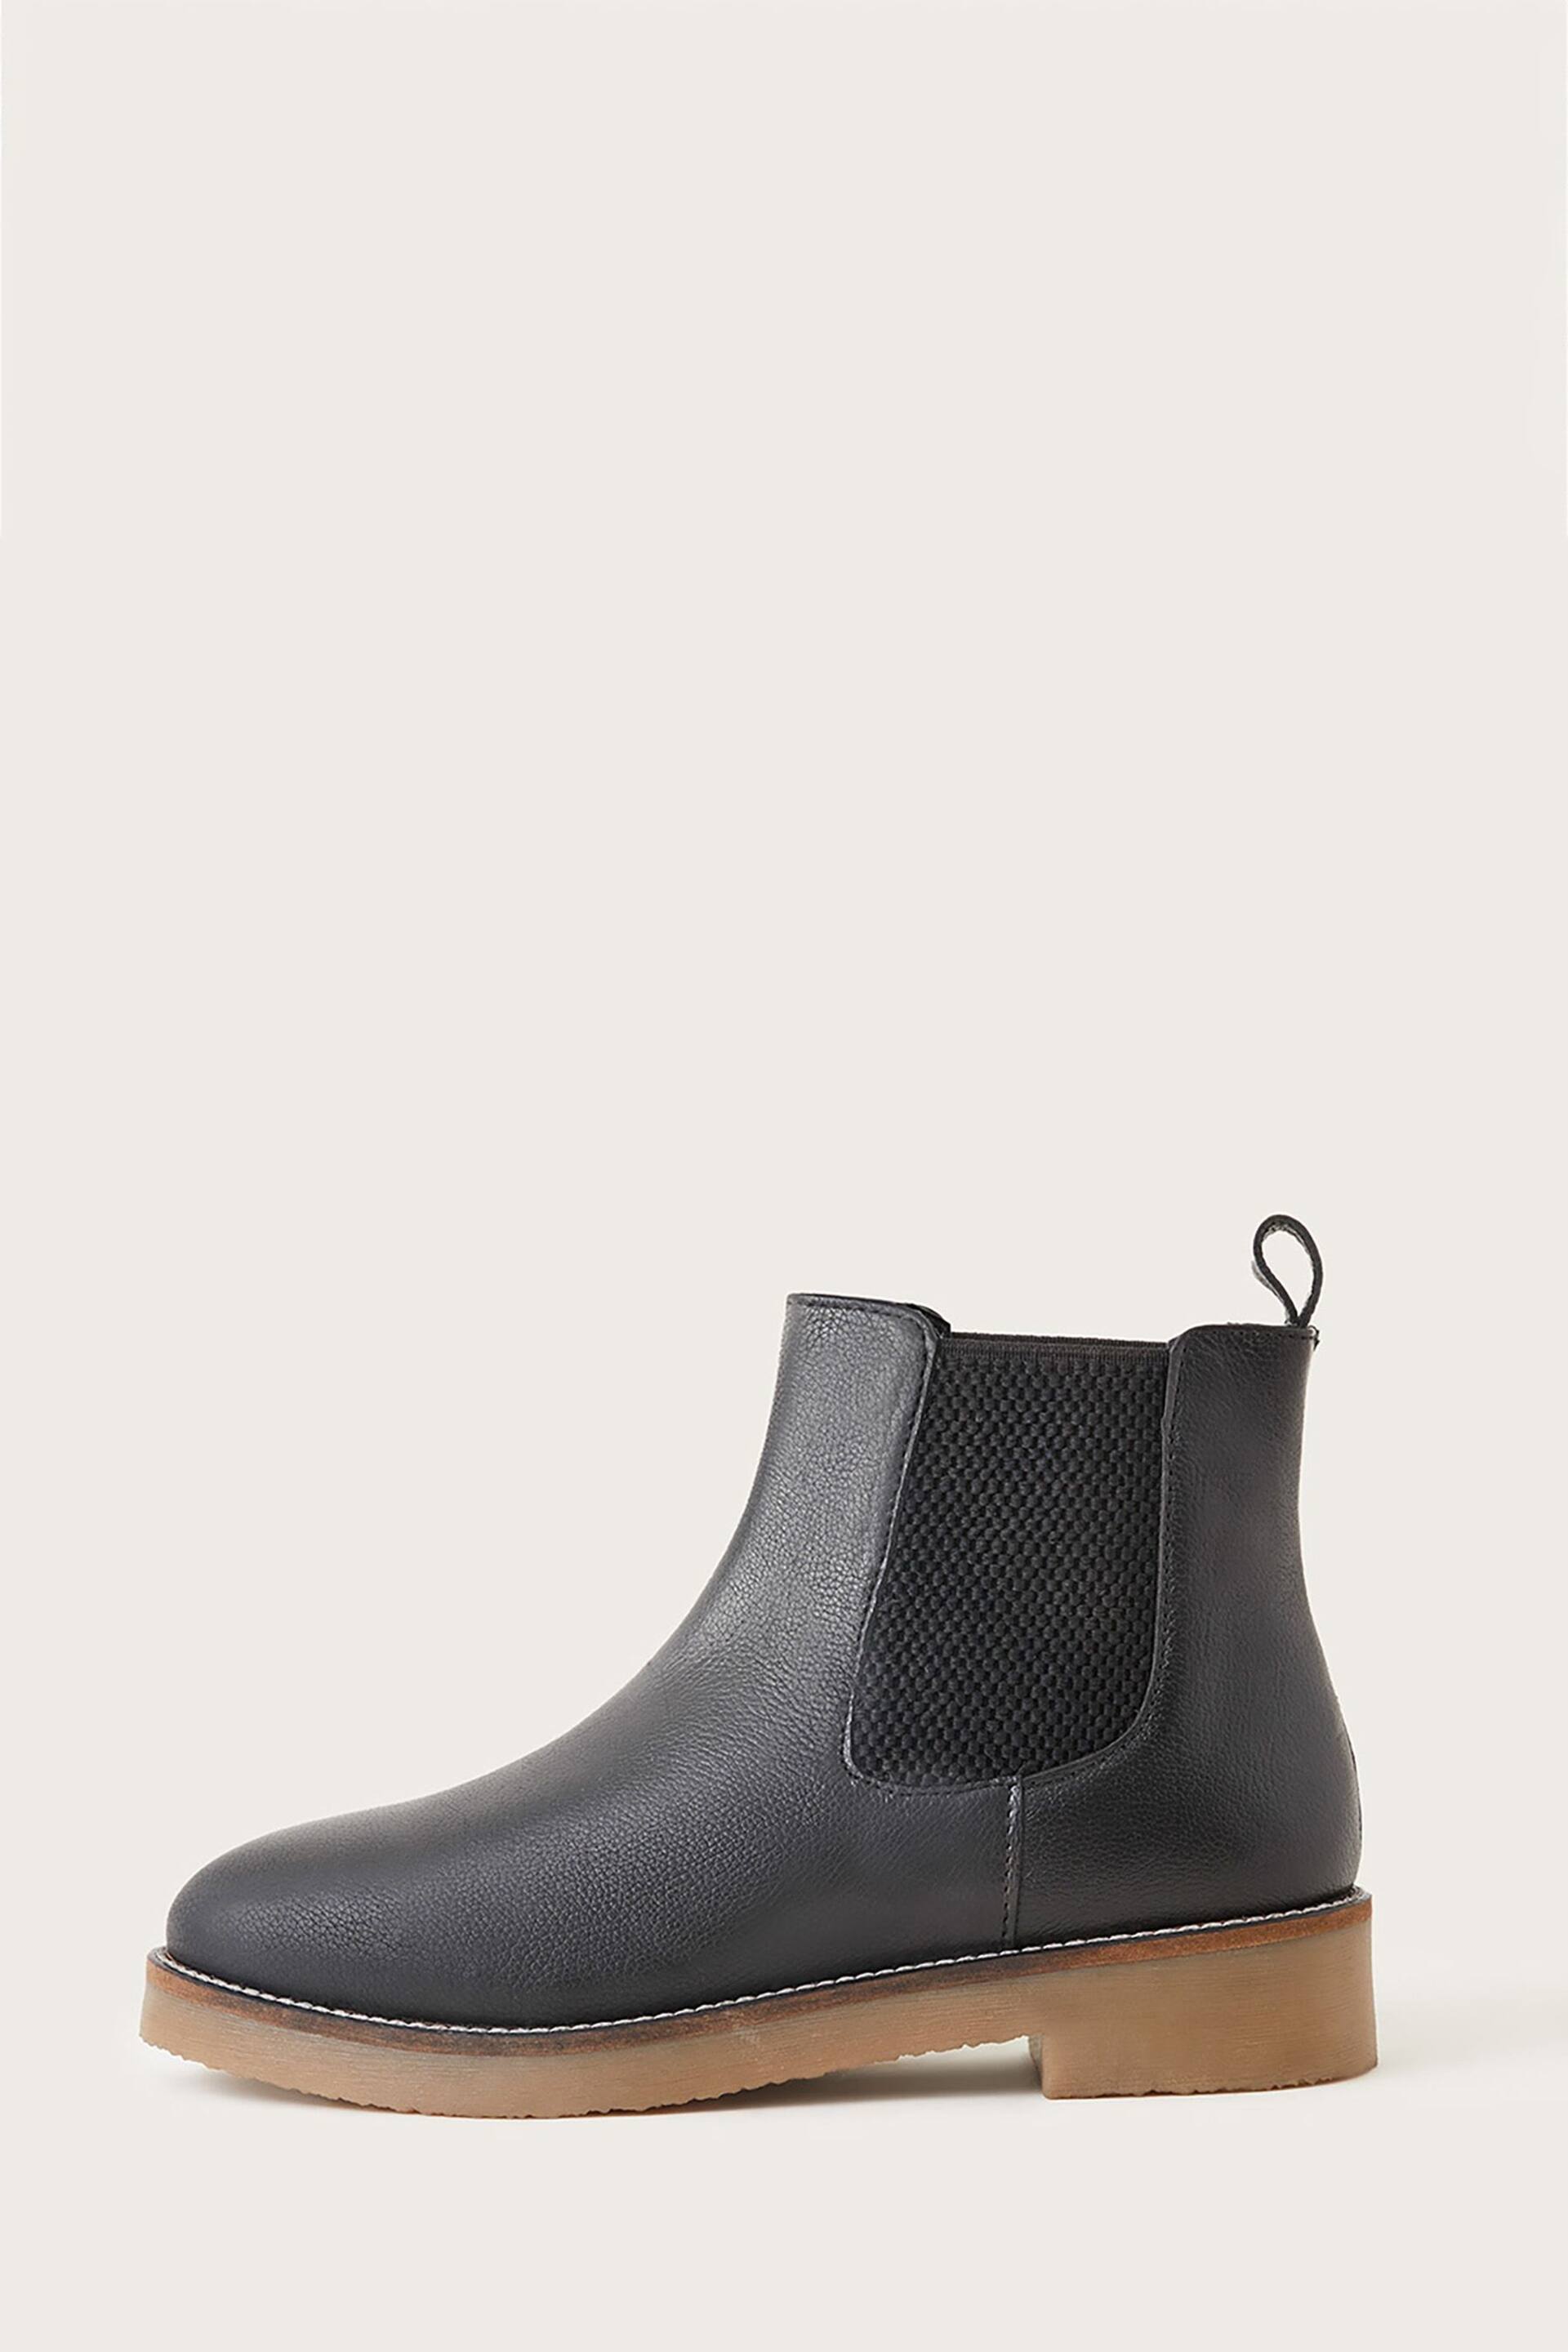 Monsoon Black Leather Chiswick Chelsea Boots - Image 1 of 3